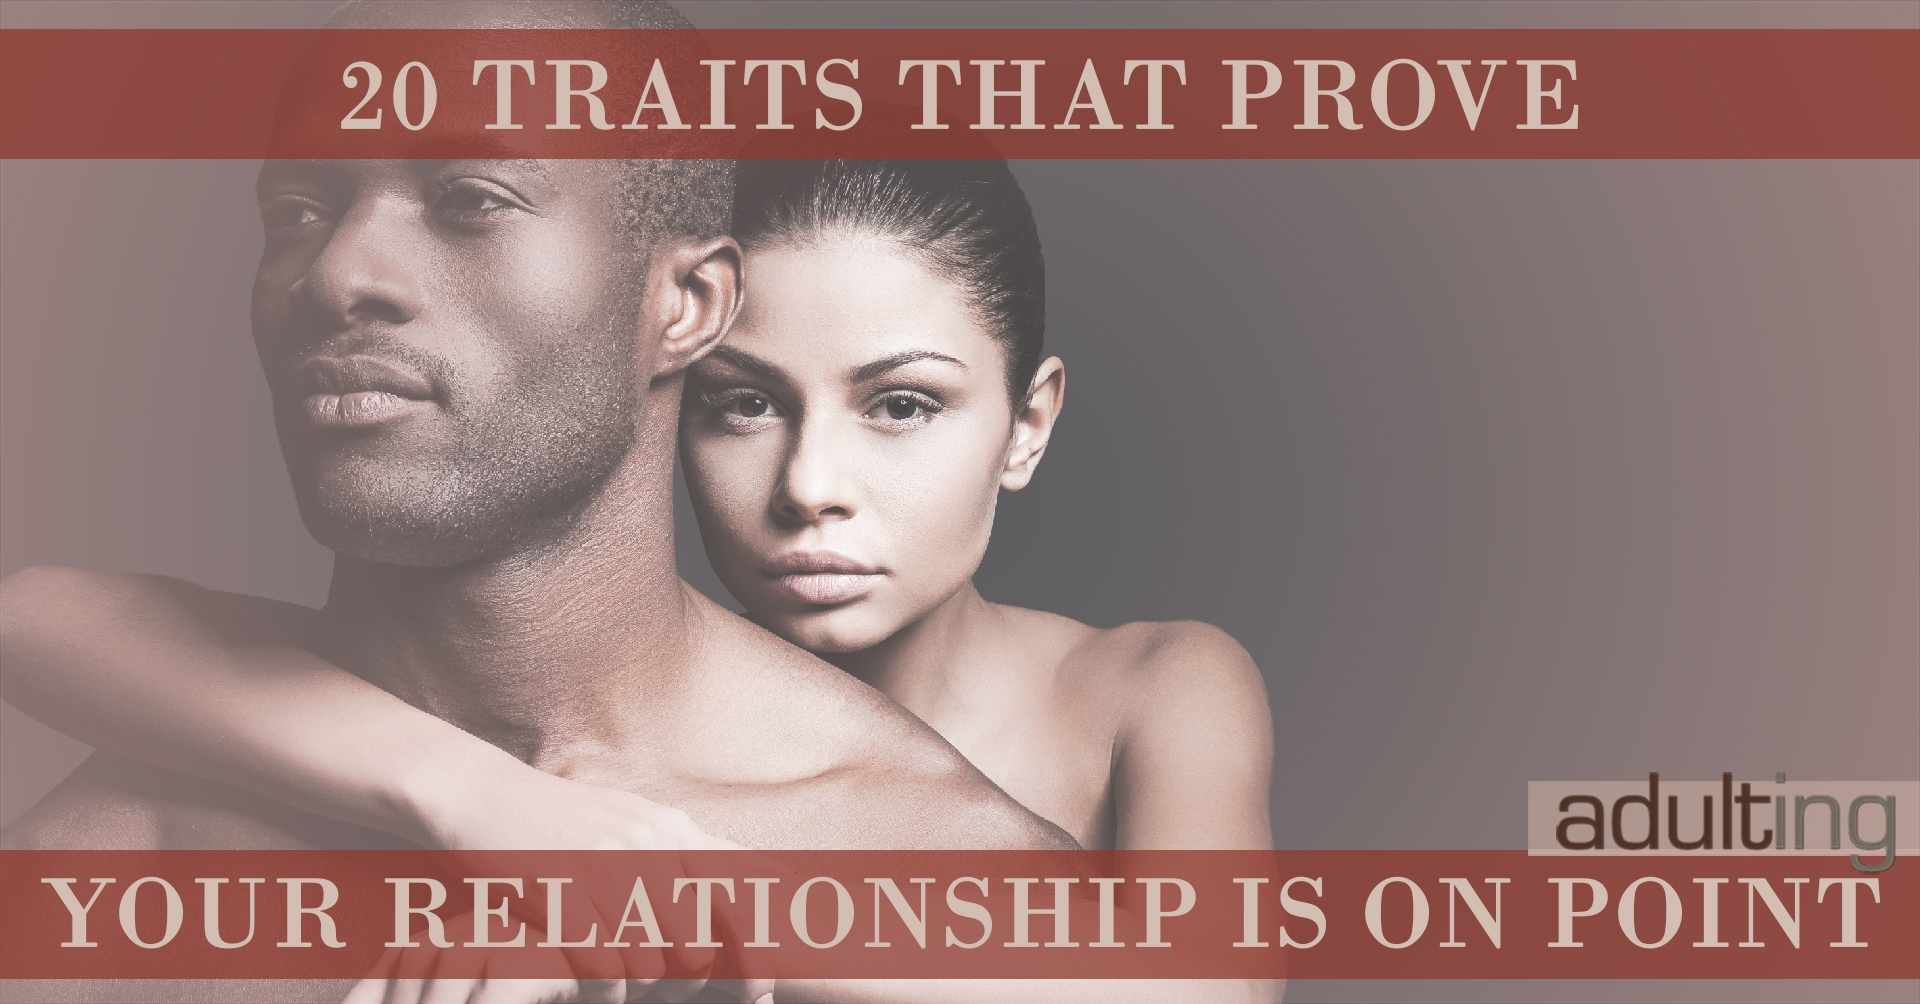 20 Traits That Prove Your Relationship Is On Point